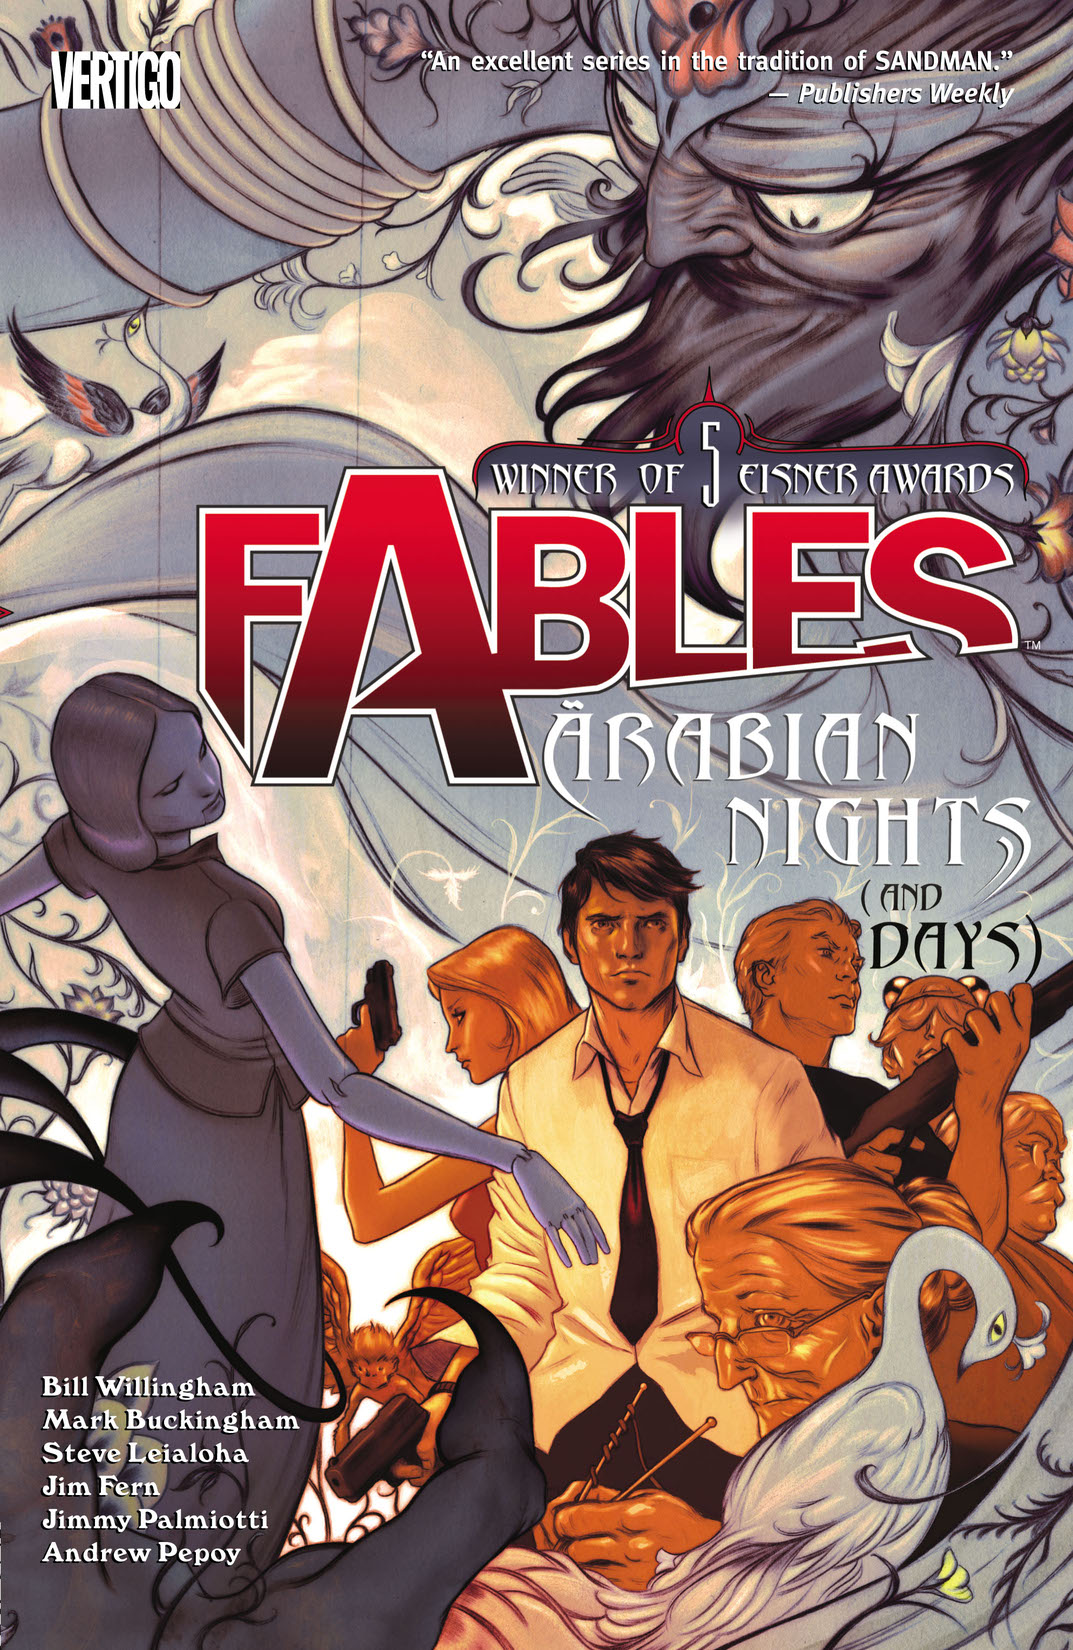 Fables Vol. 7: Arabian Nights (and Days) preview images